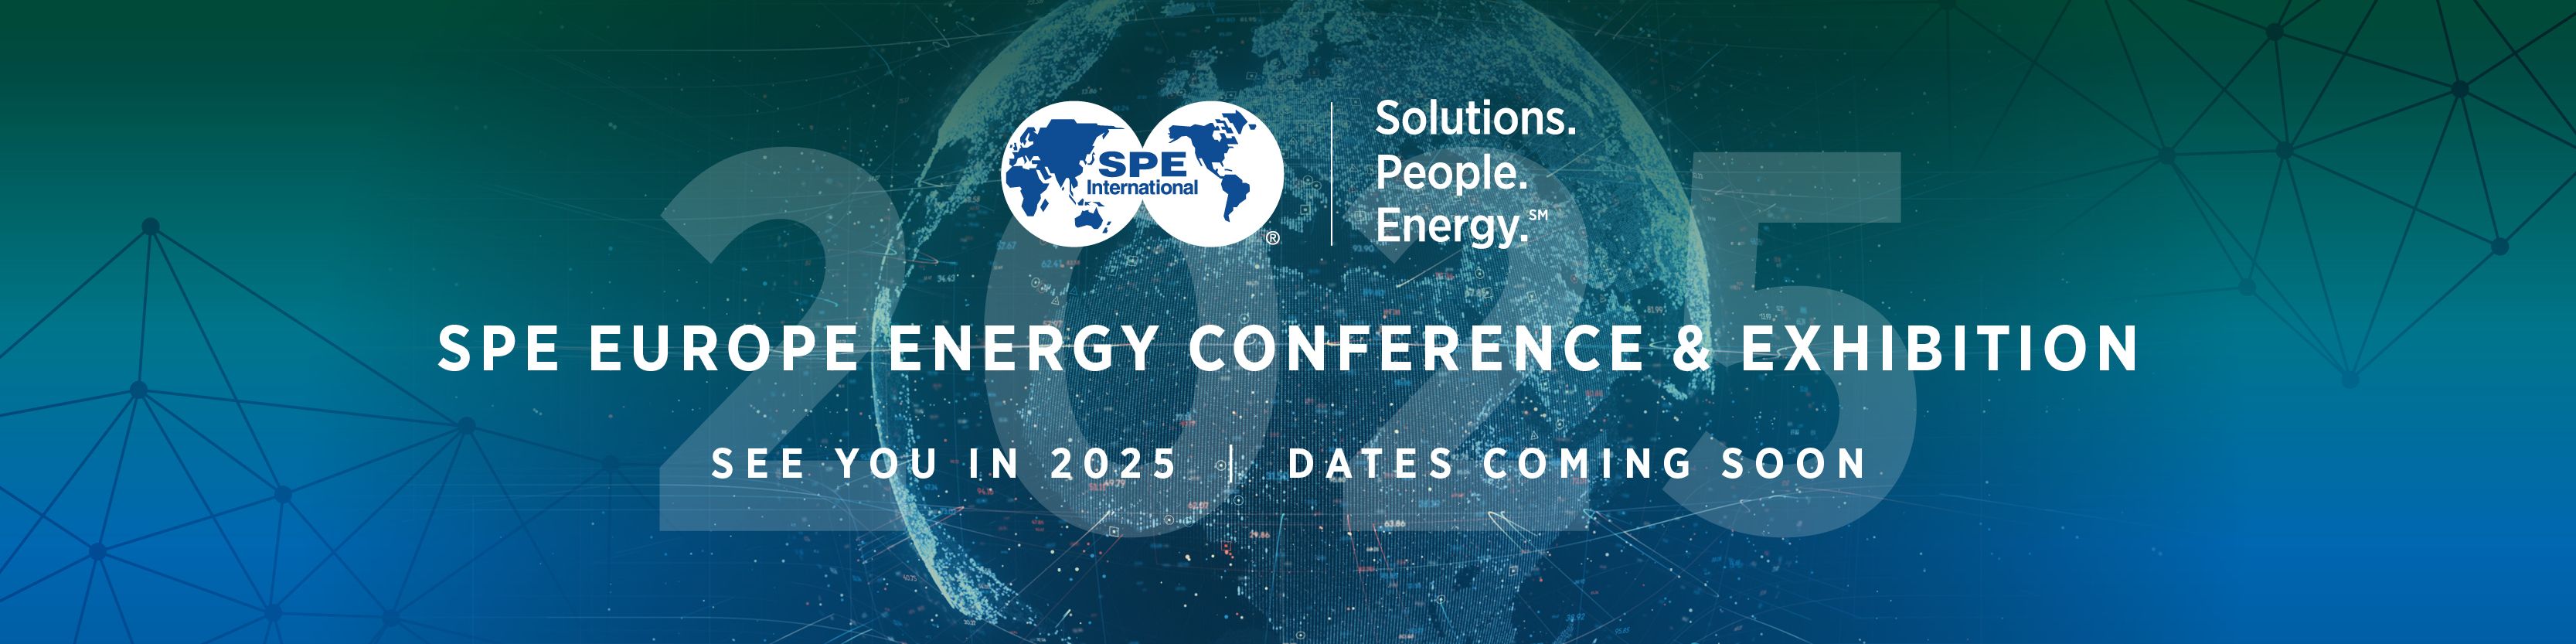 SPE Europe Energy Conference and Exhibition 2025